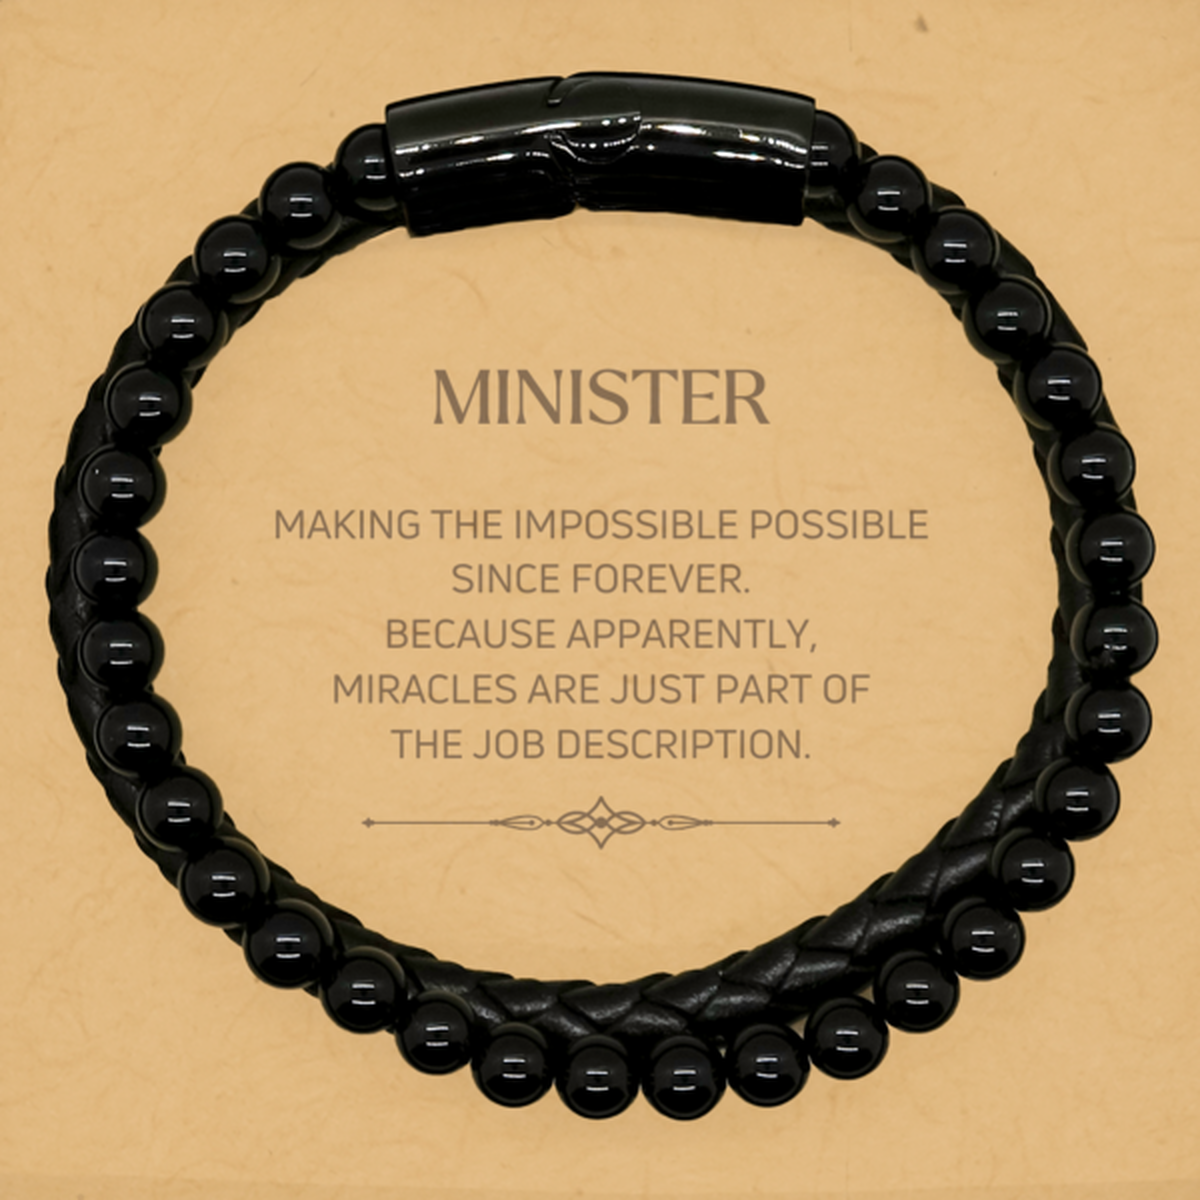 Funny Minister Gifts, Miracles are just part of the job description, Inspirational Birthday Stone Leather Bracelets For Minister, Men, Women, Coworkers, Friends, Boss